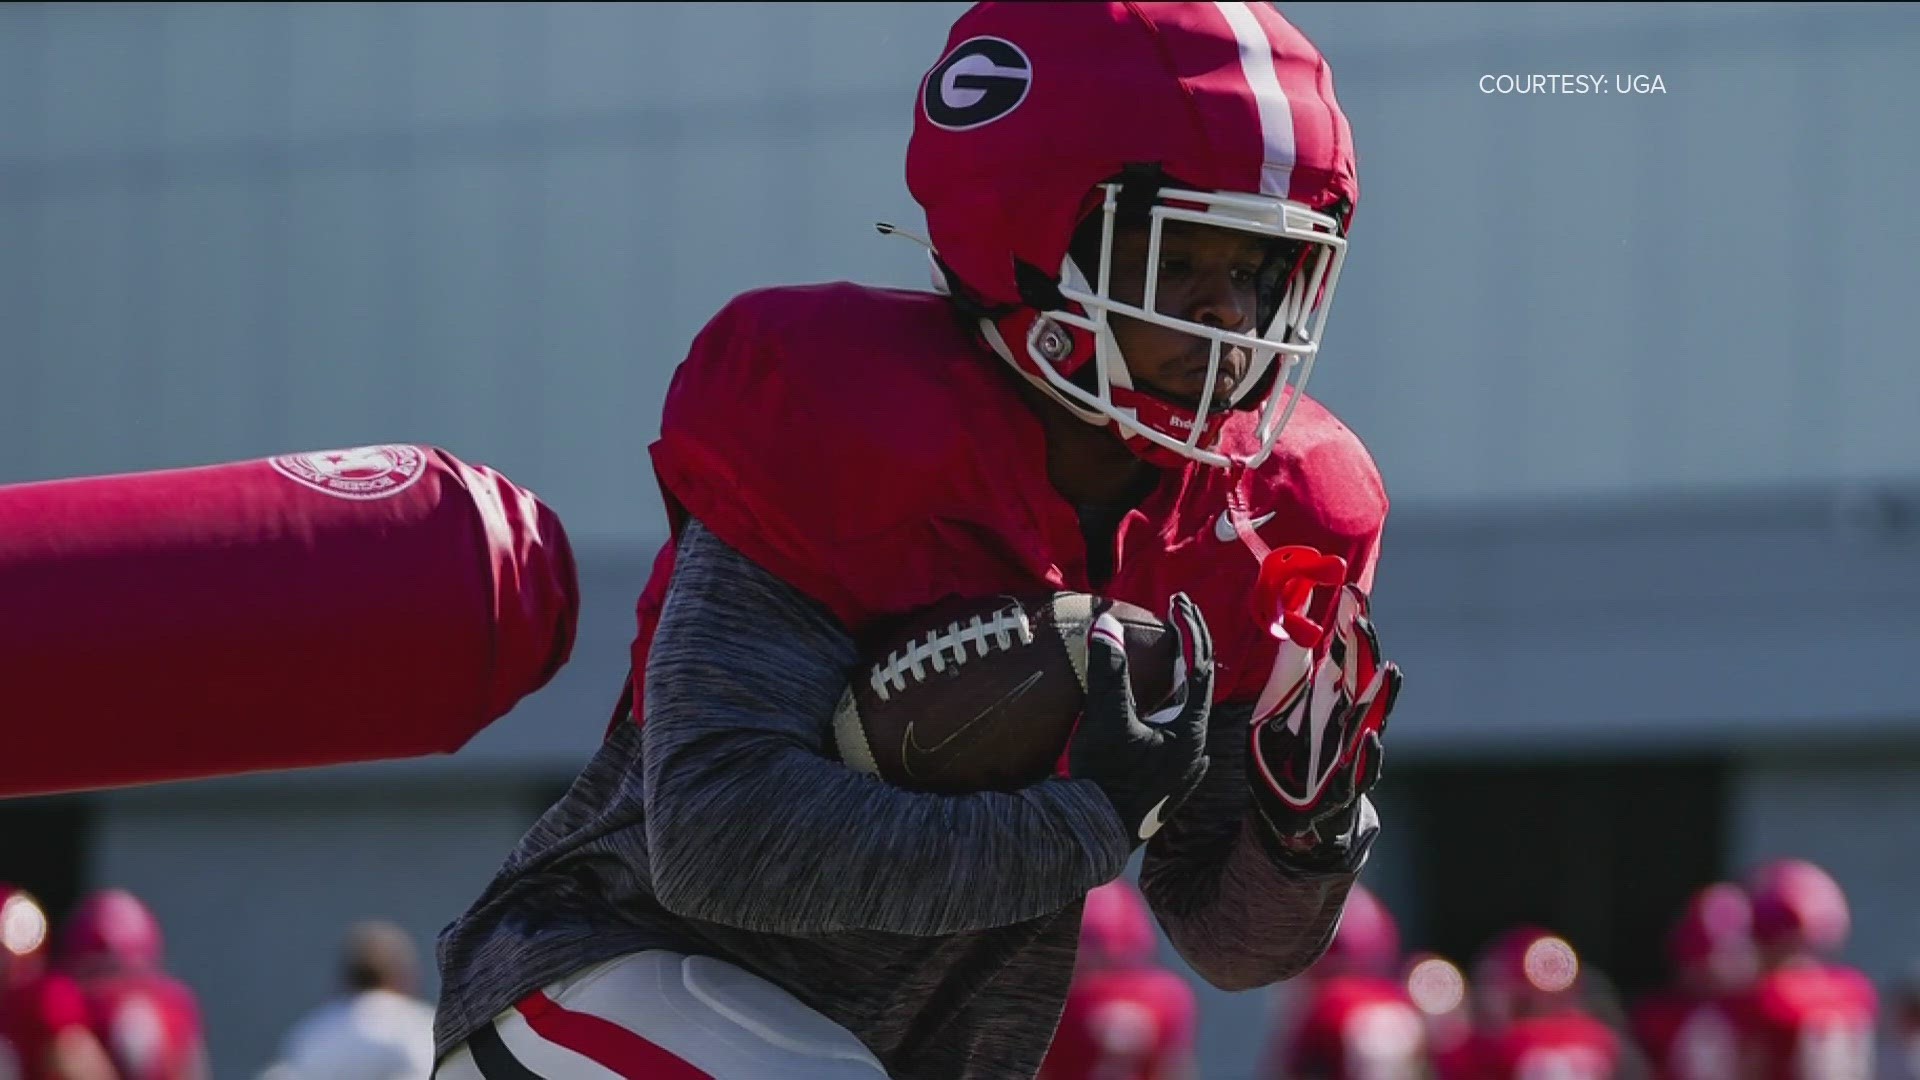 The arrest marks the latest of numerous reckless driving incidents involving UGA football players over the last couple of years.